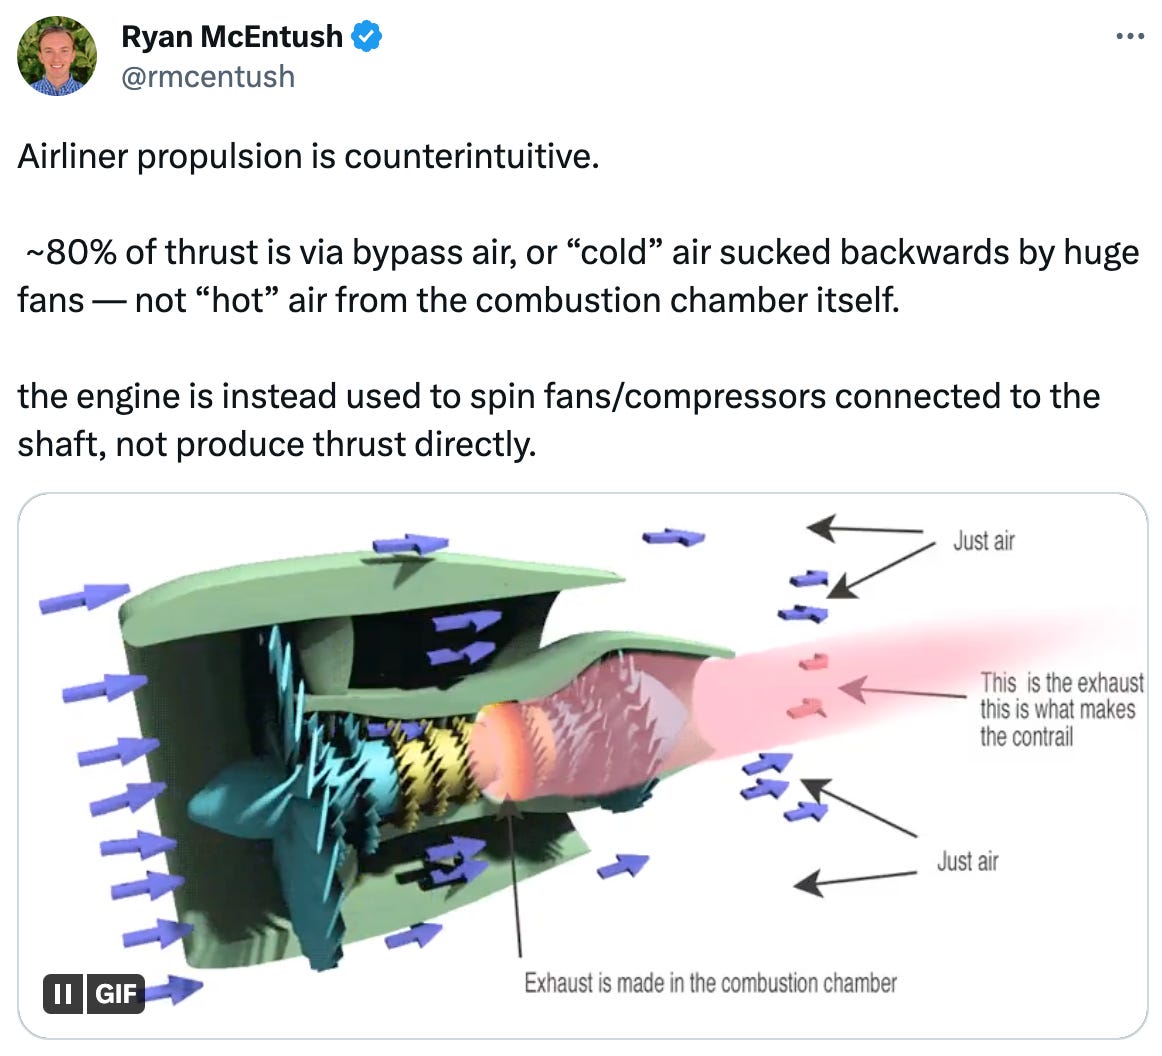  See new Tweets Conversation Ryan McEntush @rmcentush Airliner propulsion is counterintuitive.   ~80% of thrust is via bypass air, or “cold” air sucked backwards by huge fans — not “hot” air from the combustion chamber itself.  the engine is instead used to spin fans/compressors connected to the shaft, not produce thrust directly.